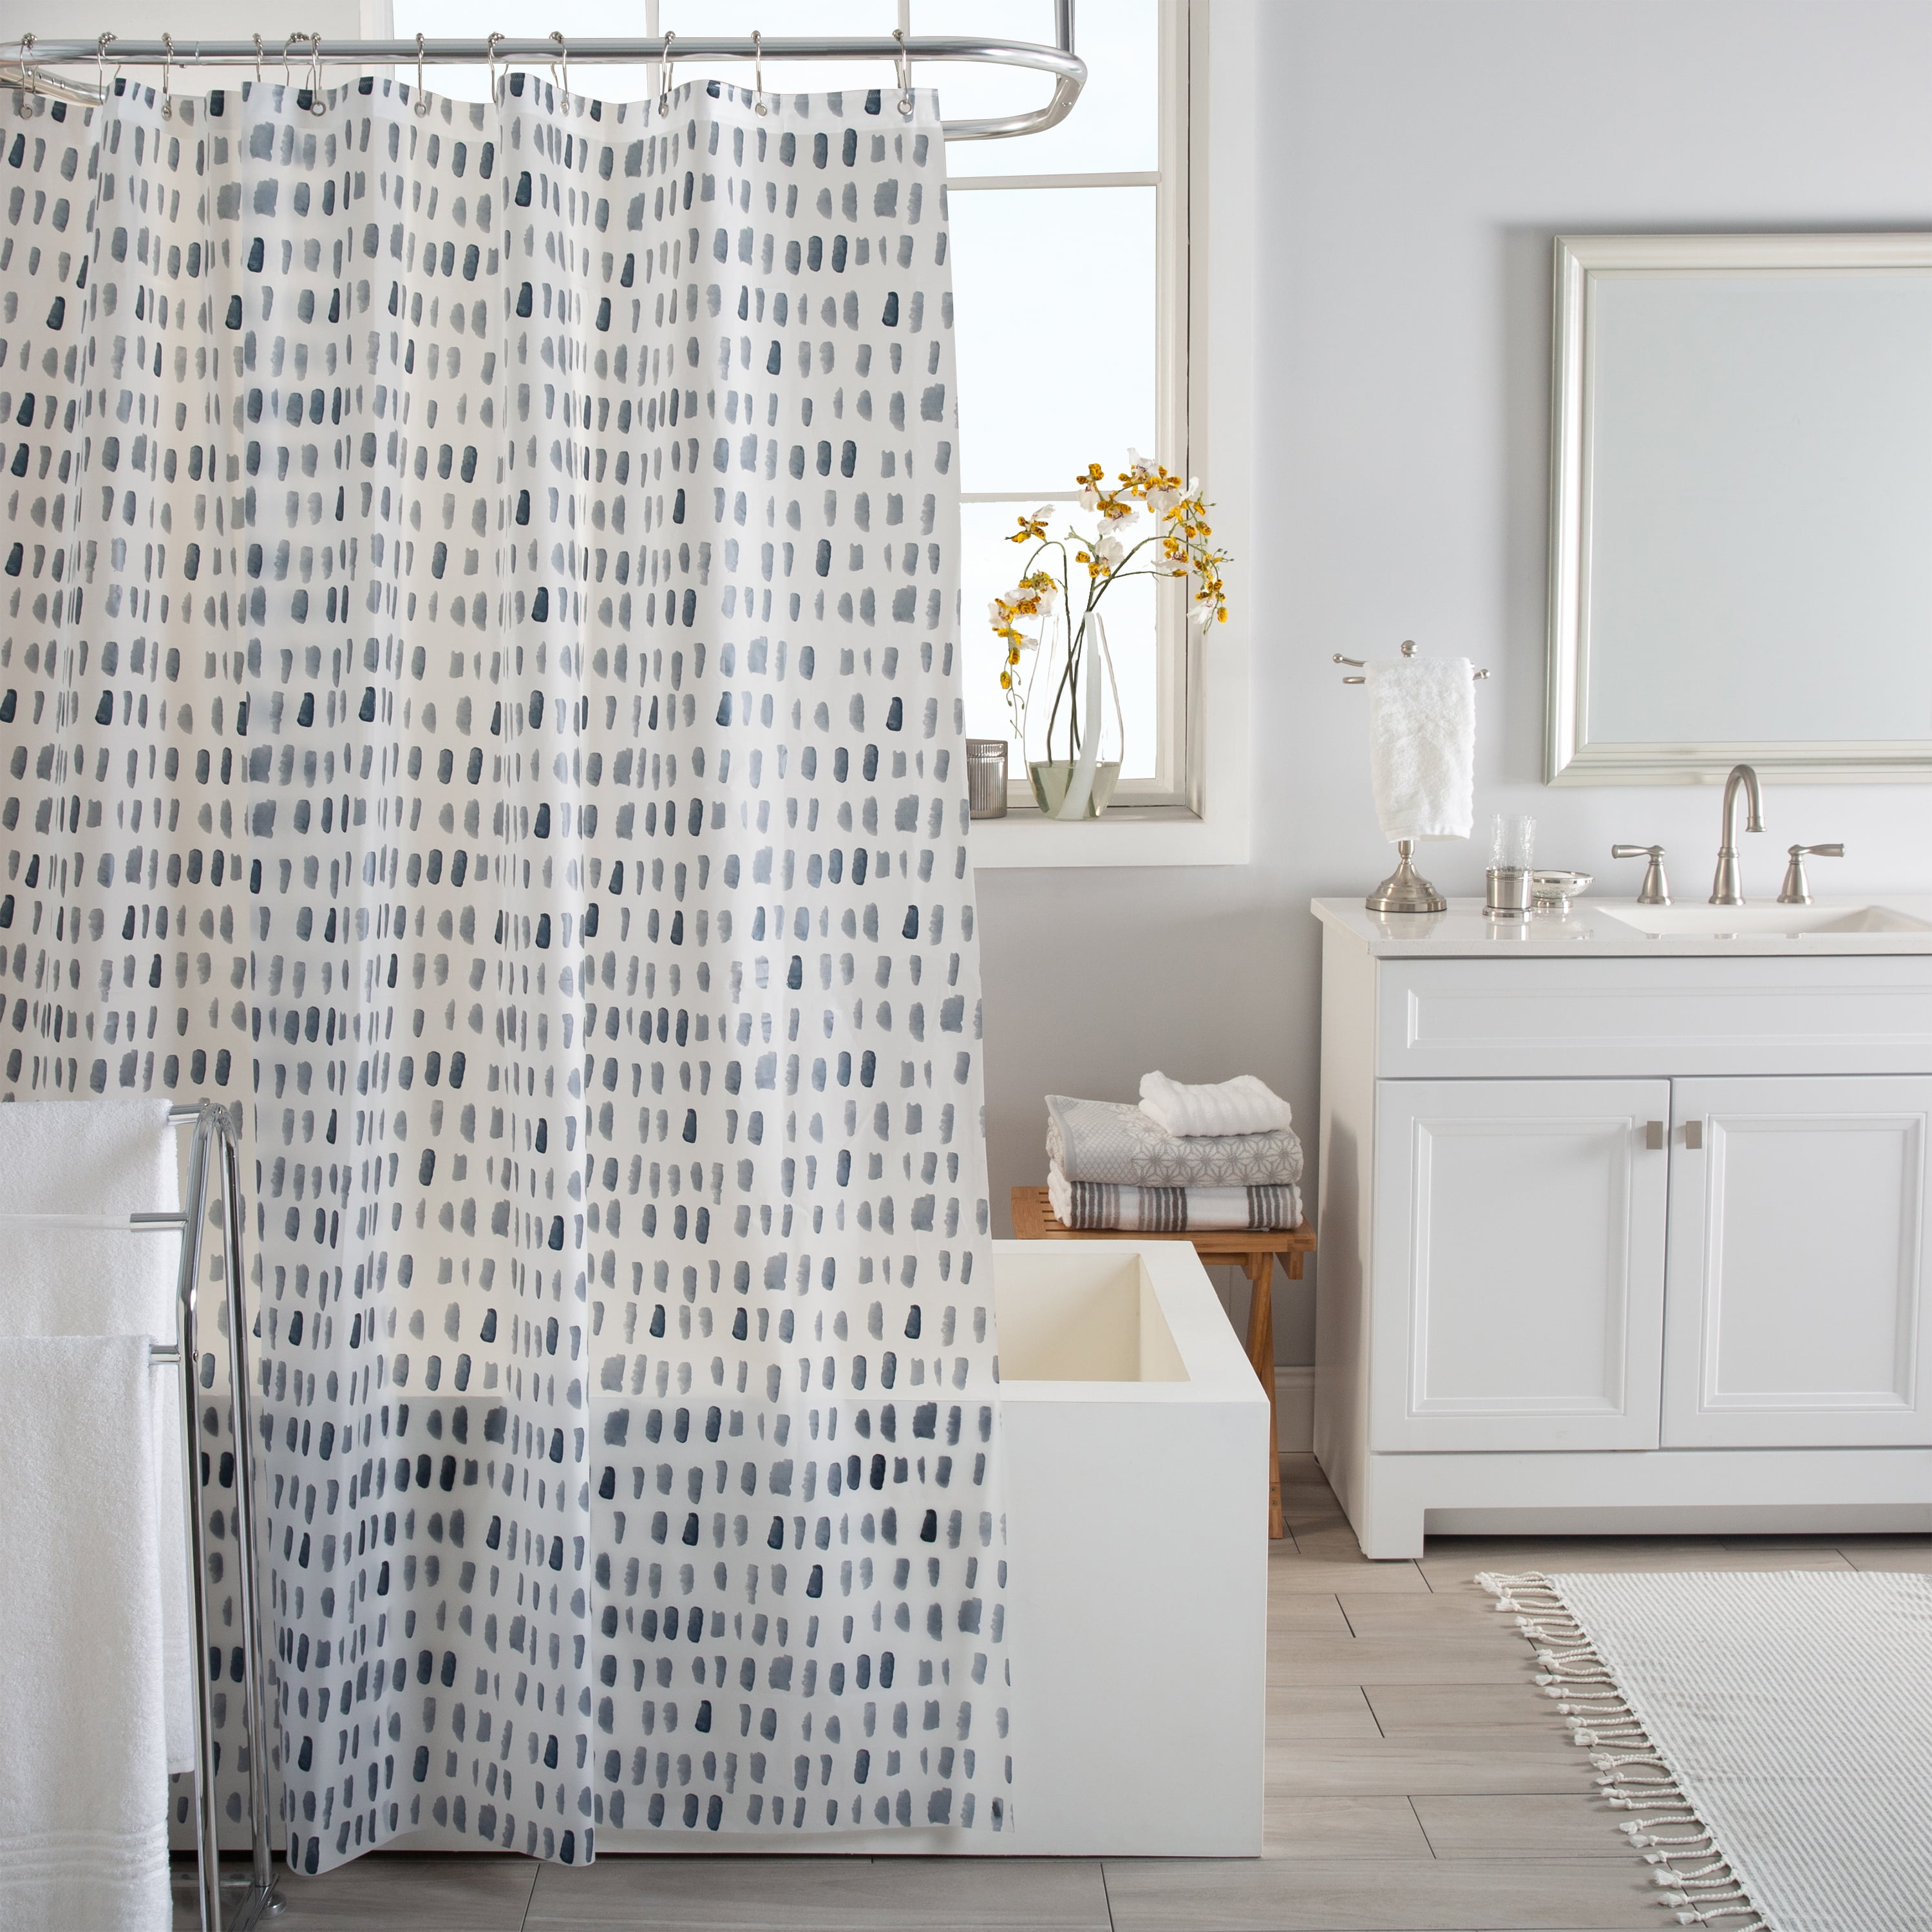 Creative Bath wholesale shower curtains and bathroom accessories available  at Kellsson Linens